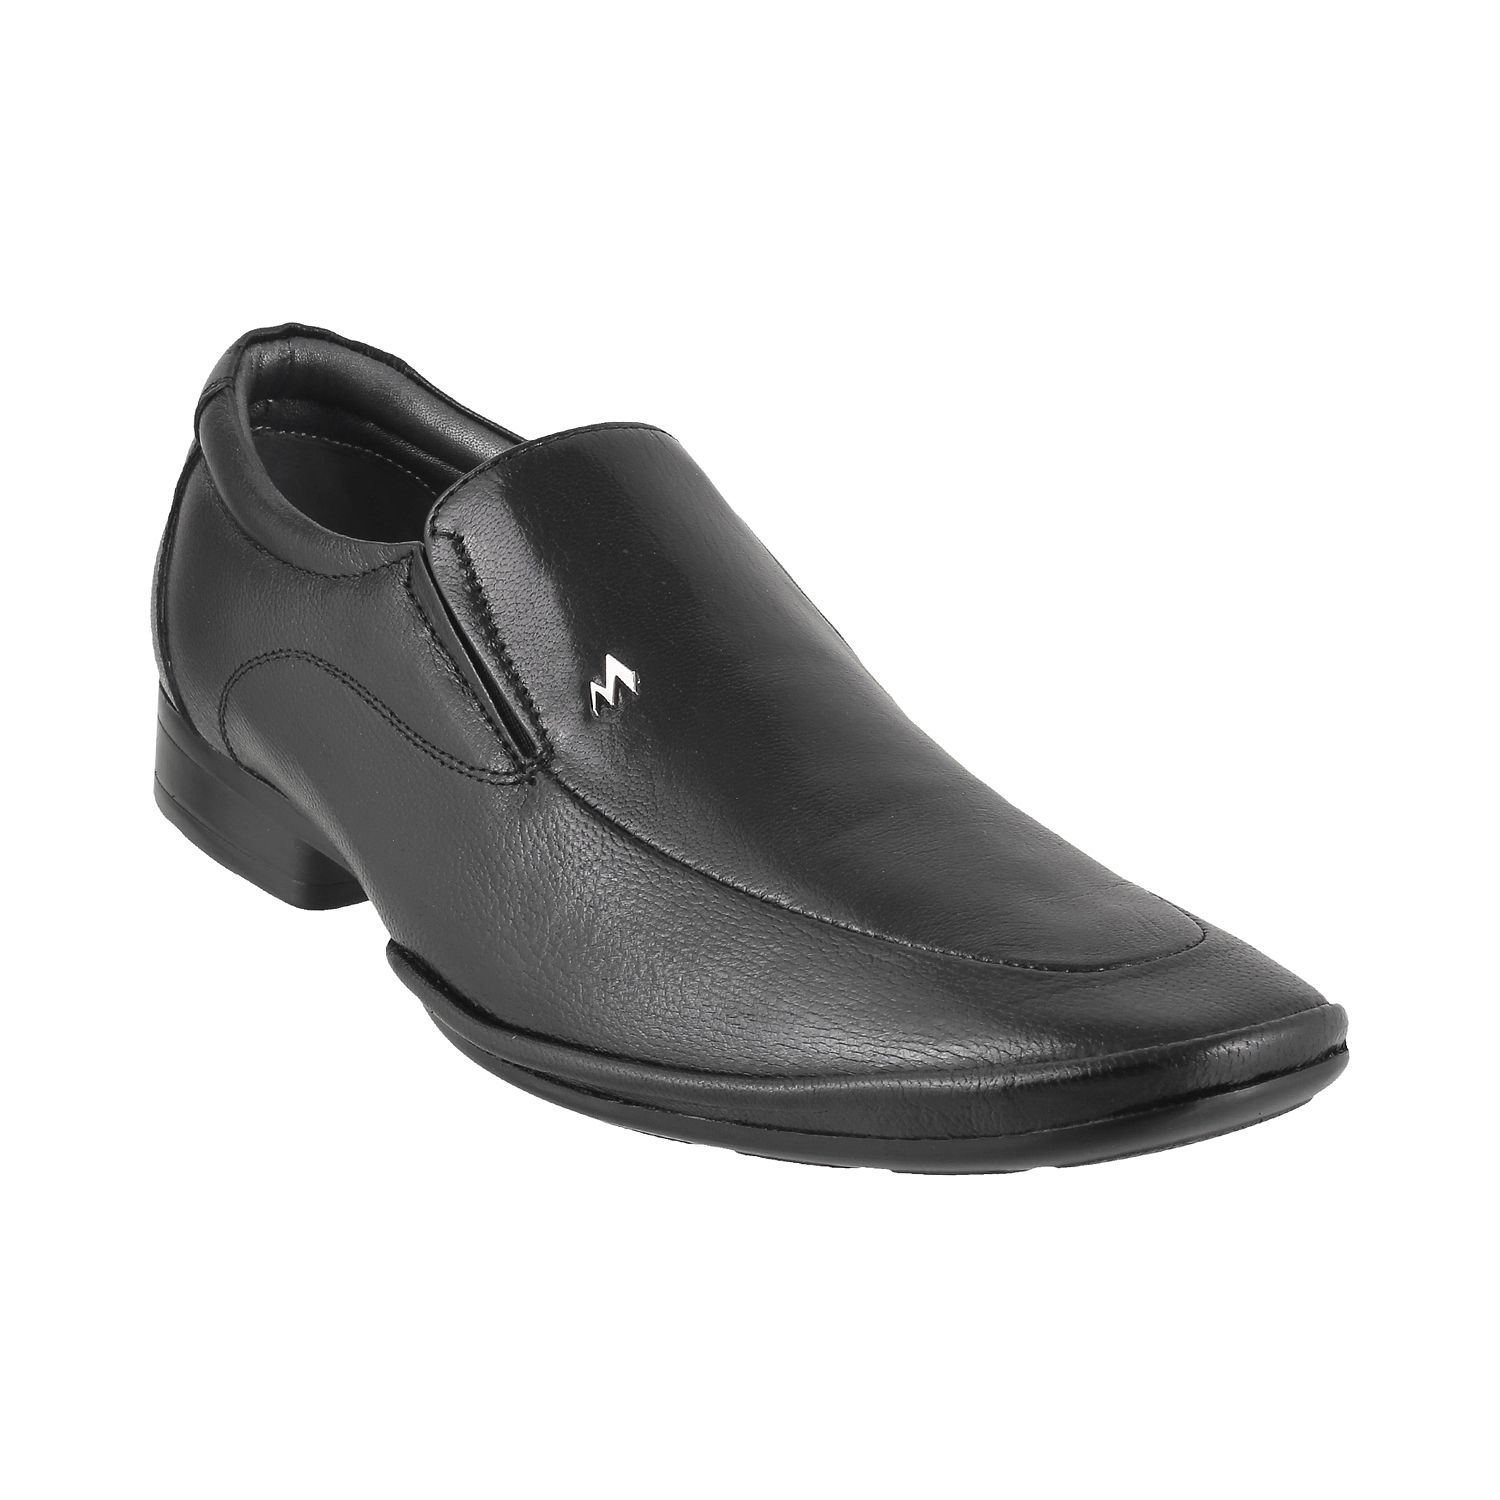     			METRO Slip On Artificial Leather BLACK Formal Shoes